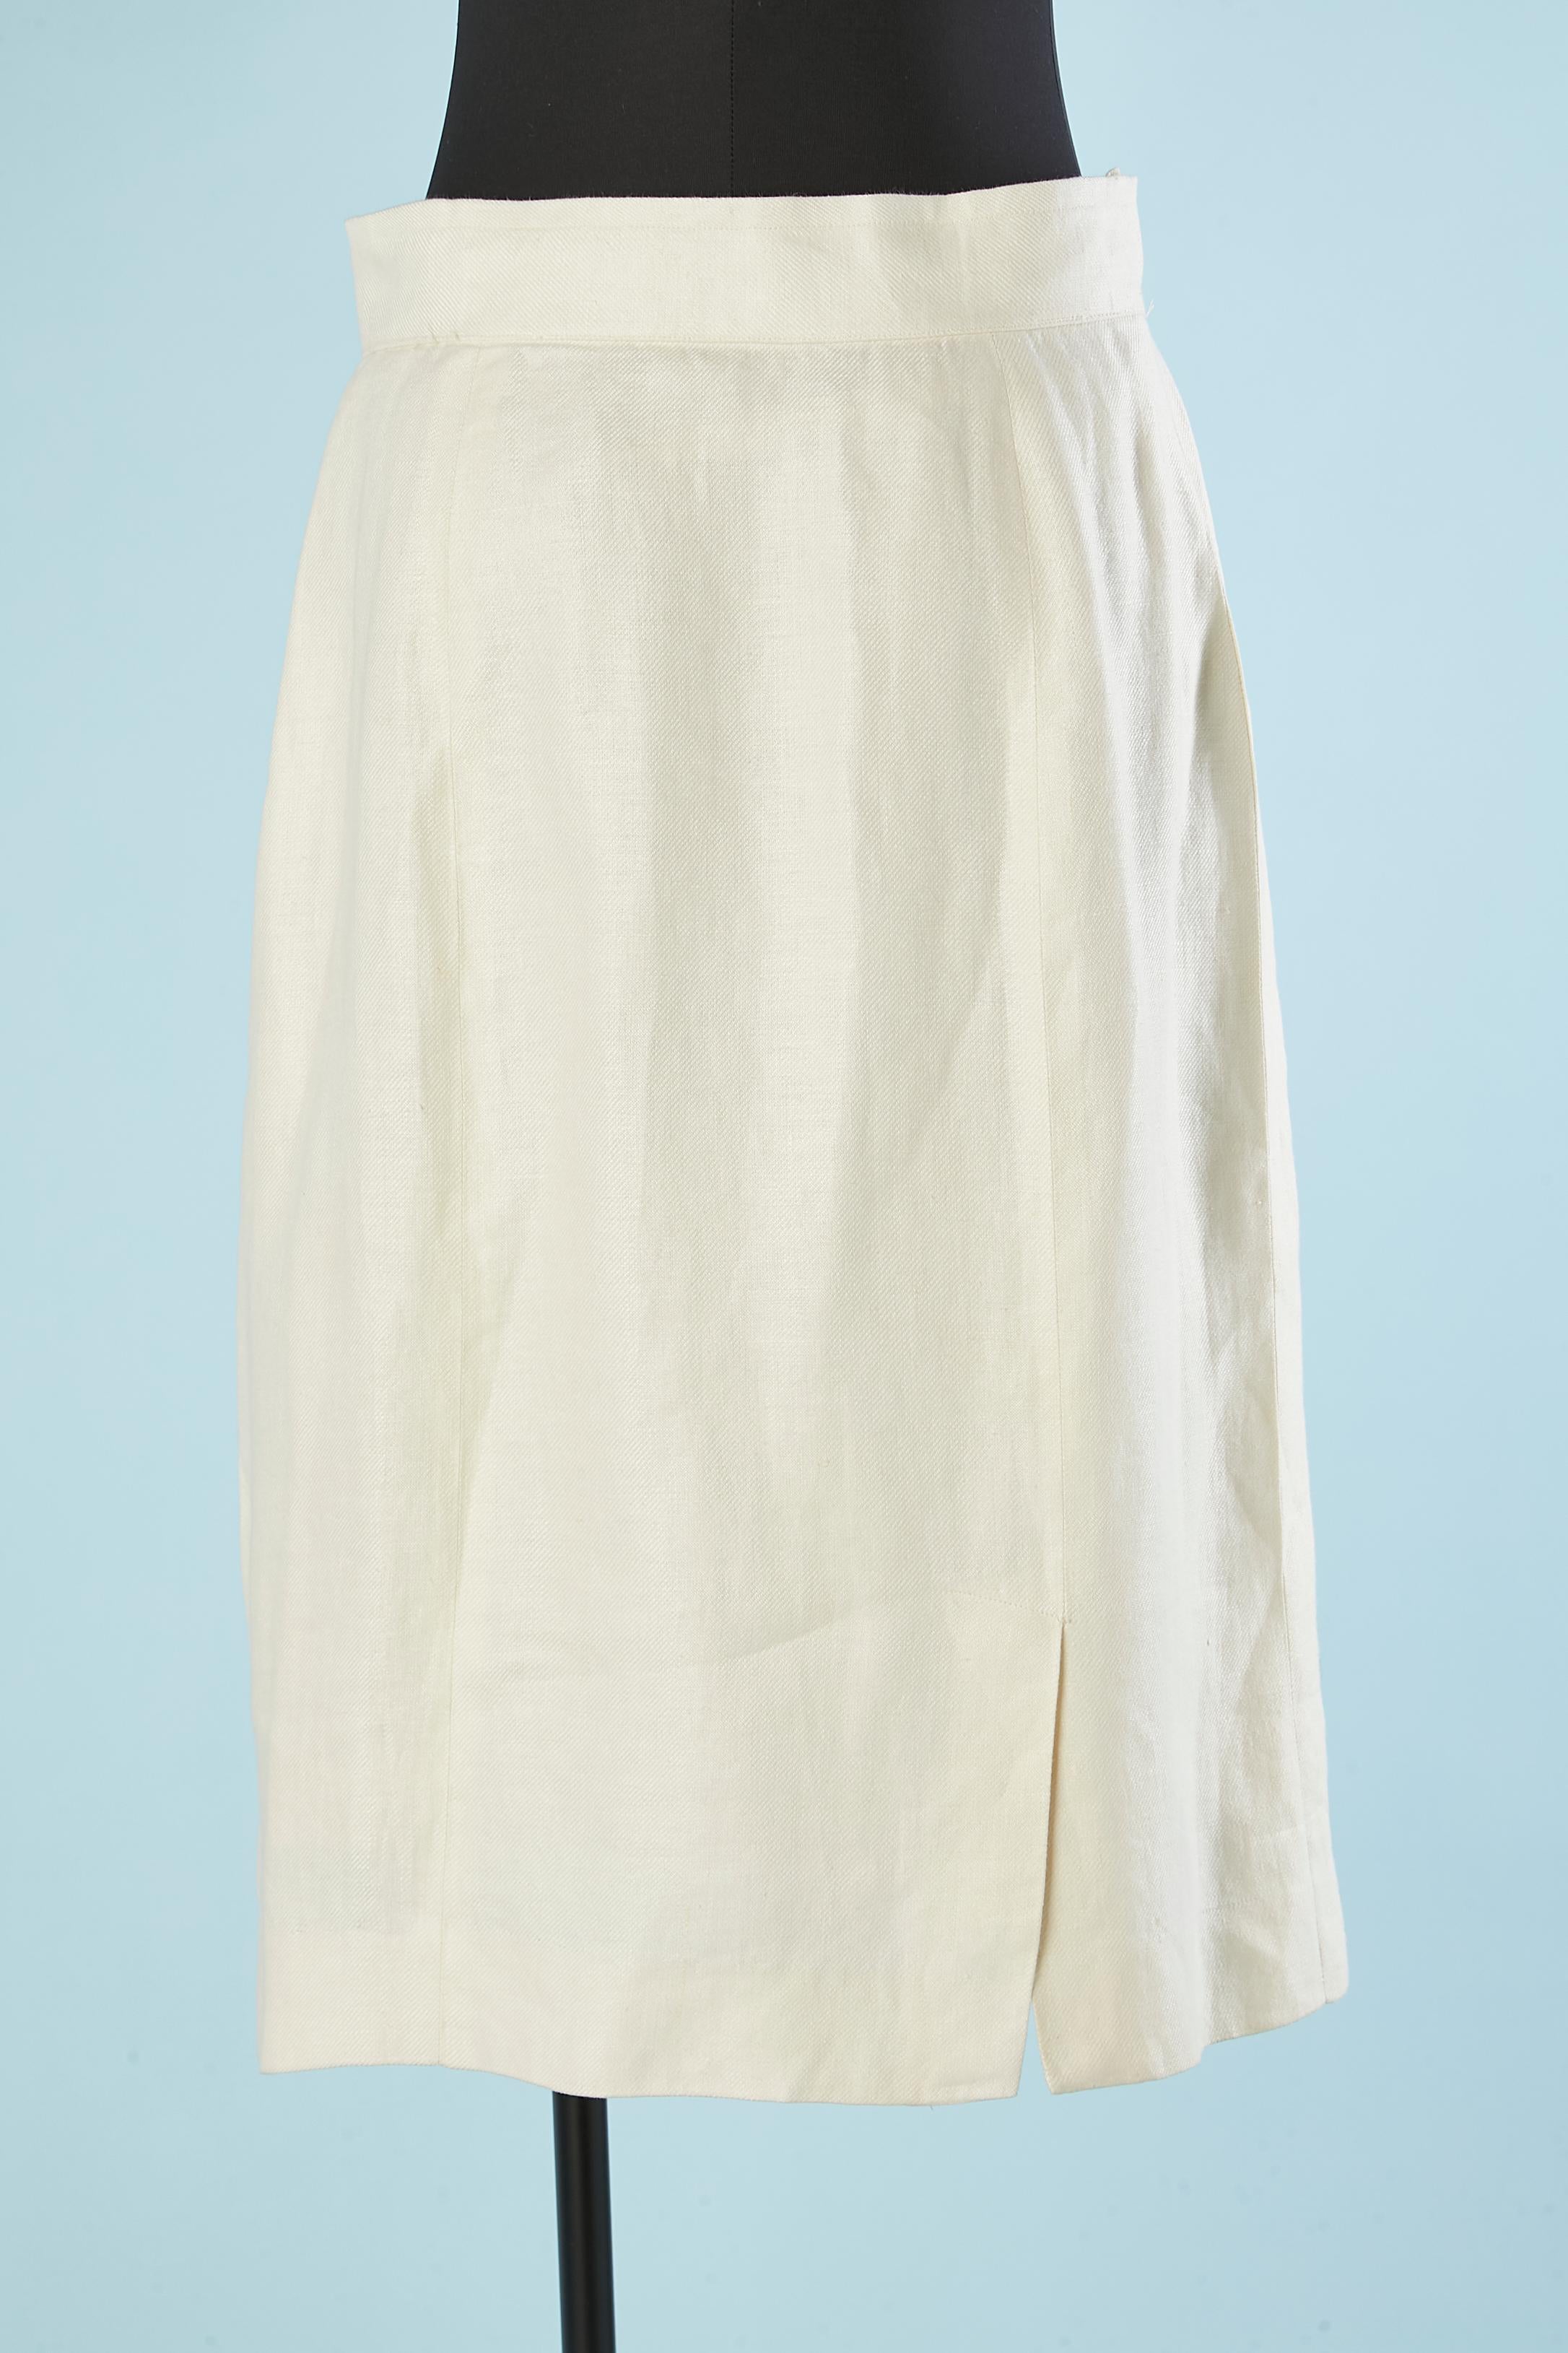 Women's Off-white linen skirt with gold metal branded buttons Chanel  For Sale